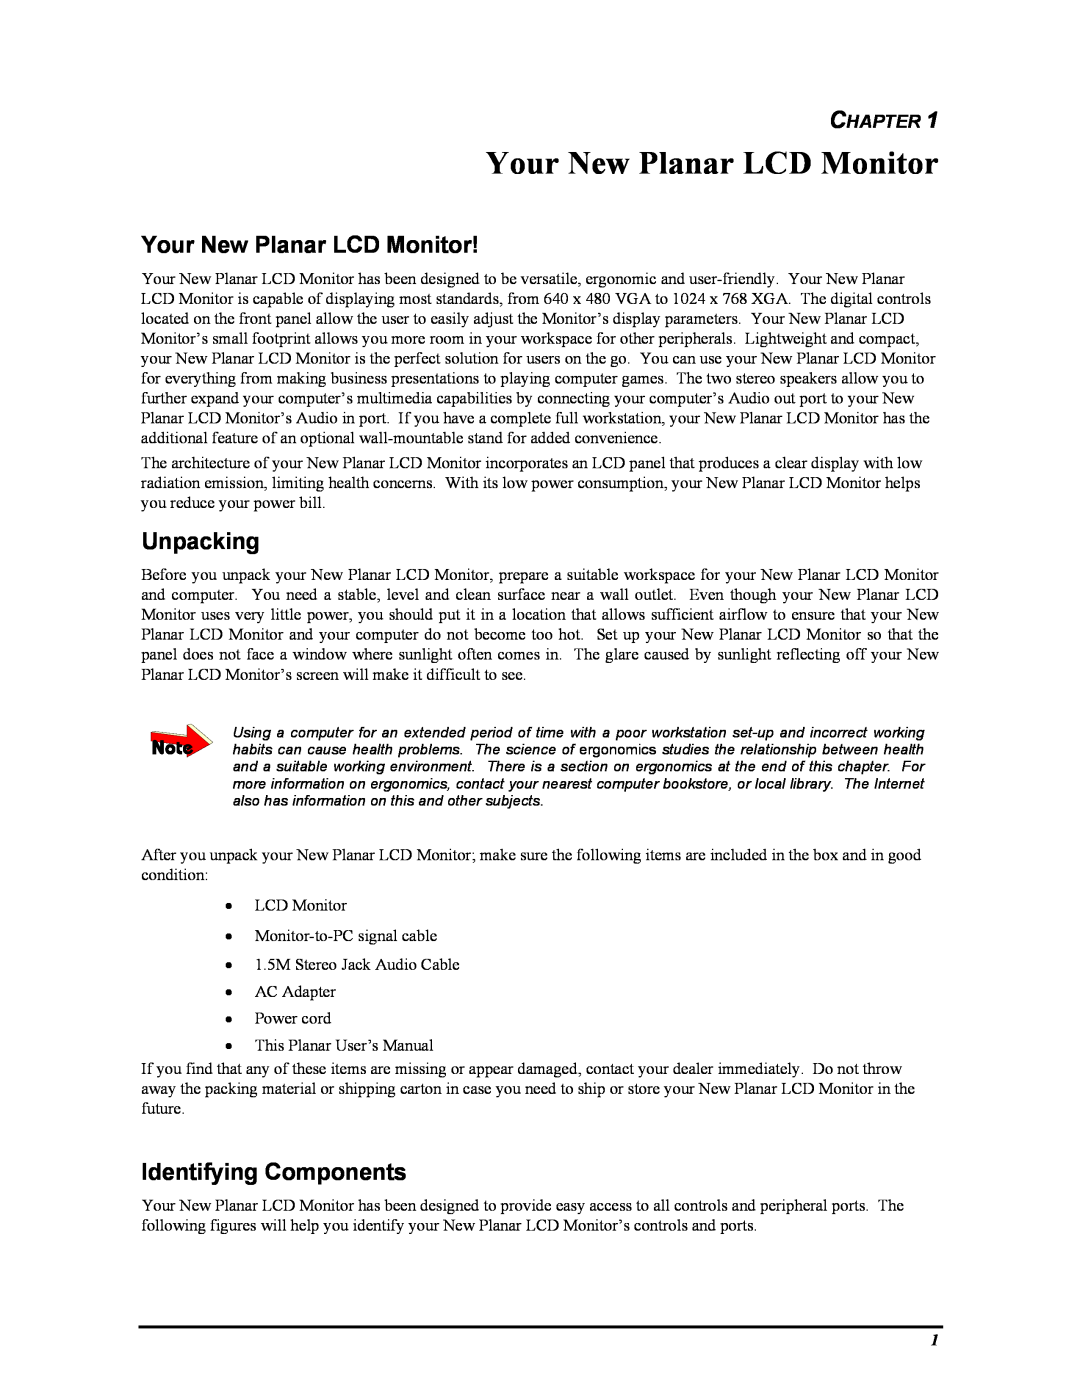 Planar PT1503Z manual Your New Planar LCD Monitor, Unpacking, Identifying Components, Chapter 